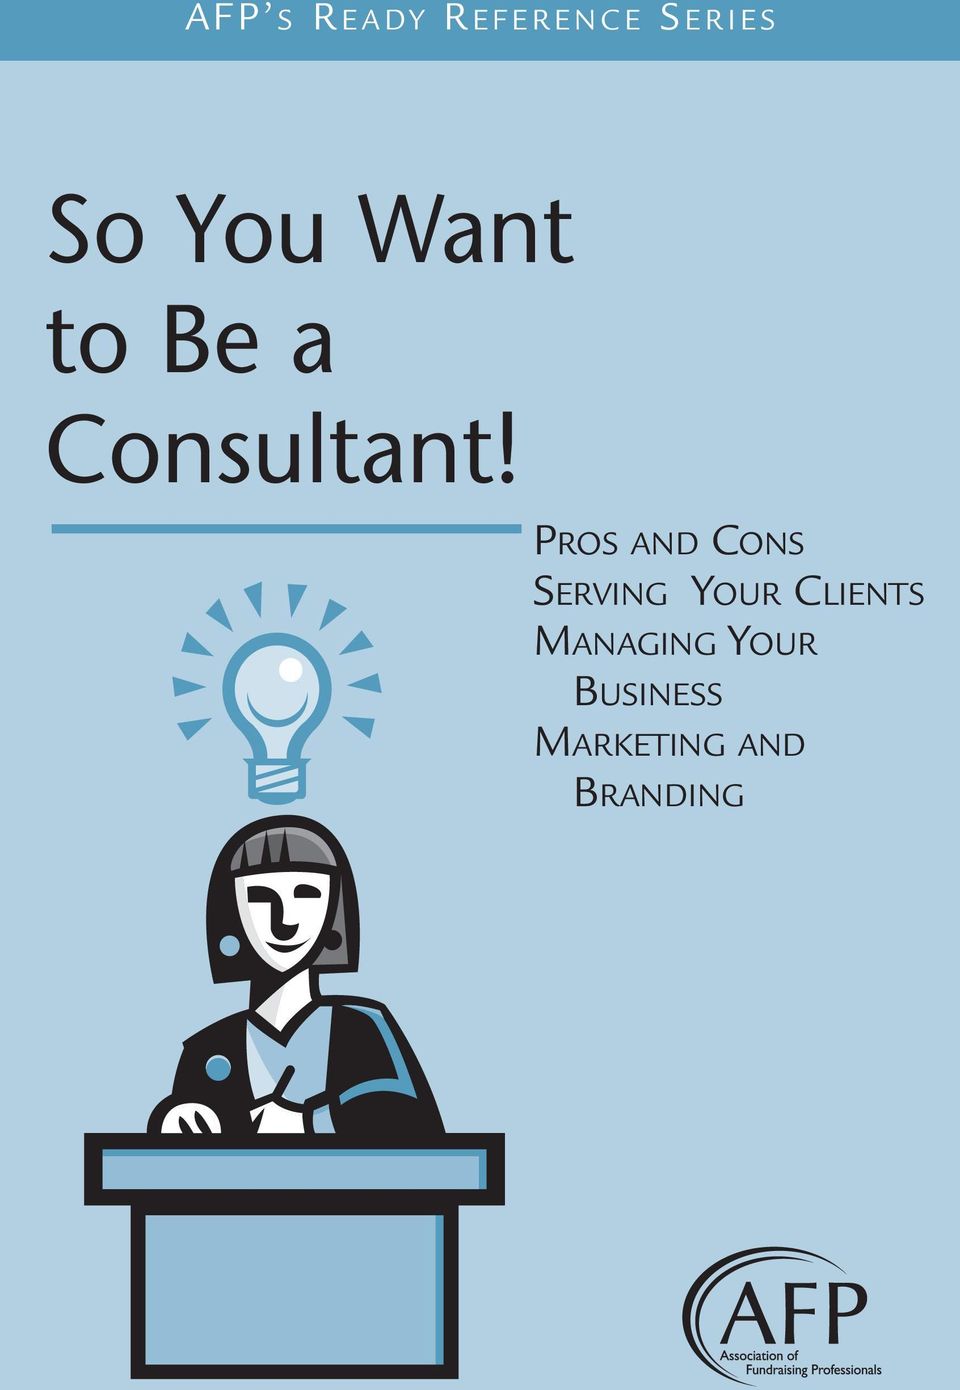 PROS AND CONS SERVING YOUR CLIENTS